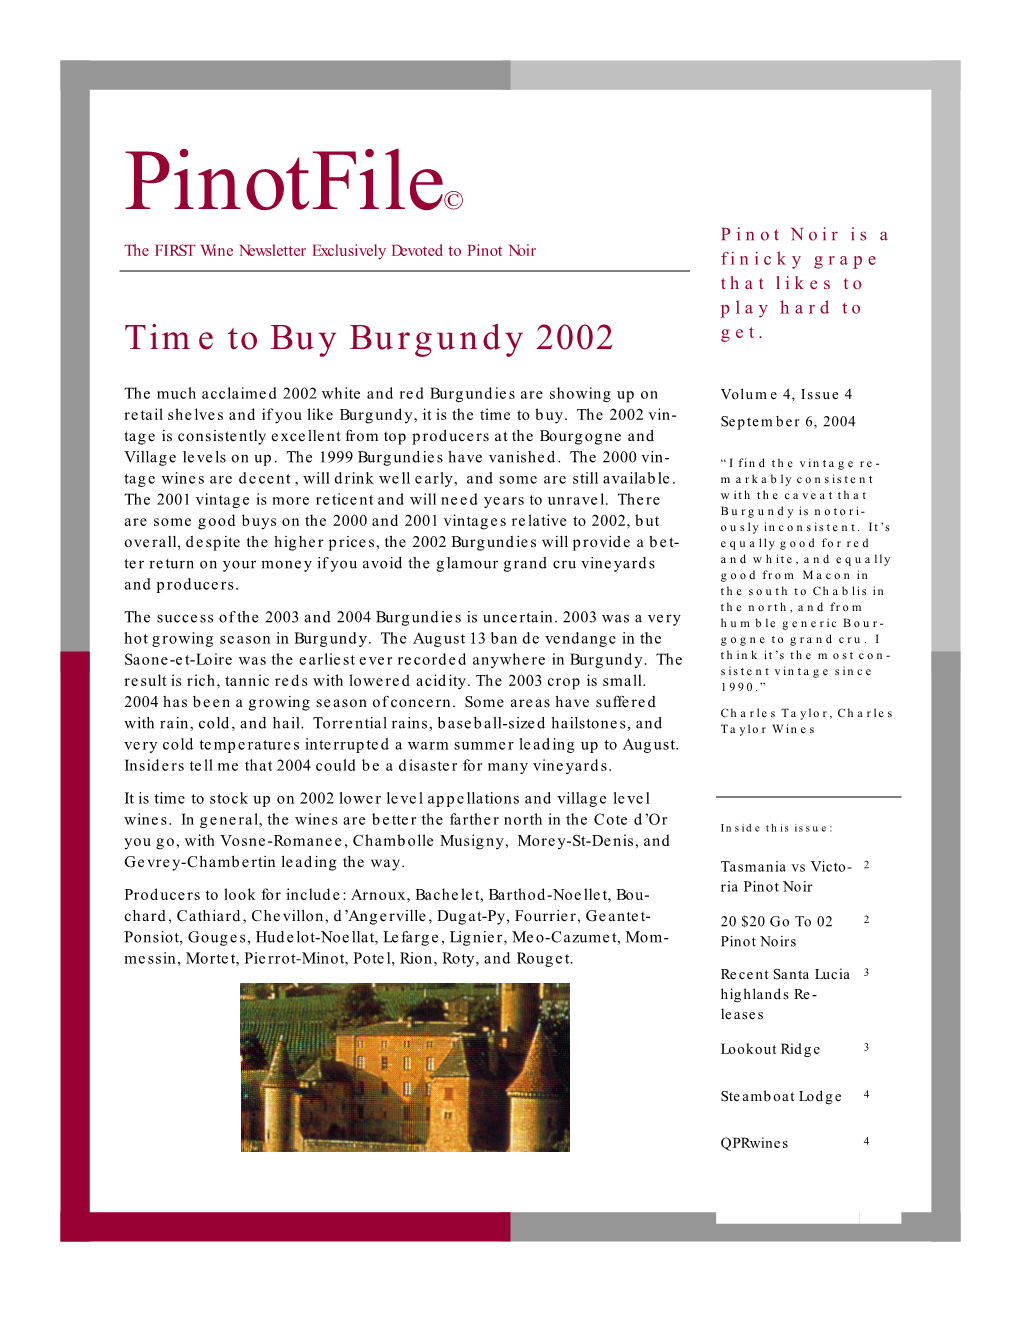 Pinotfile Vol 4, Issue 4